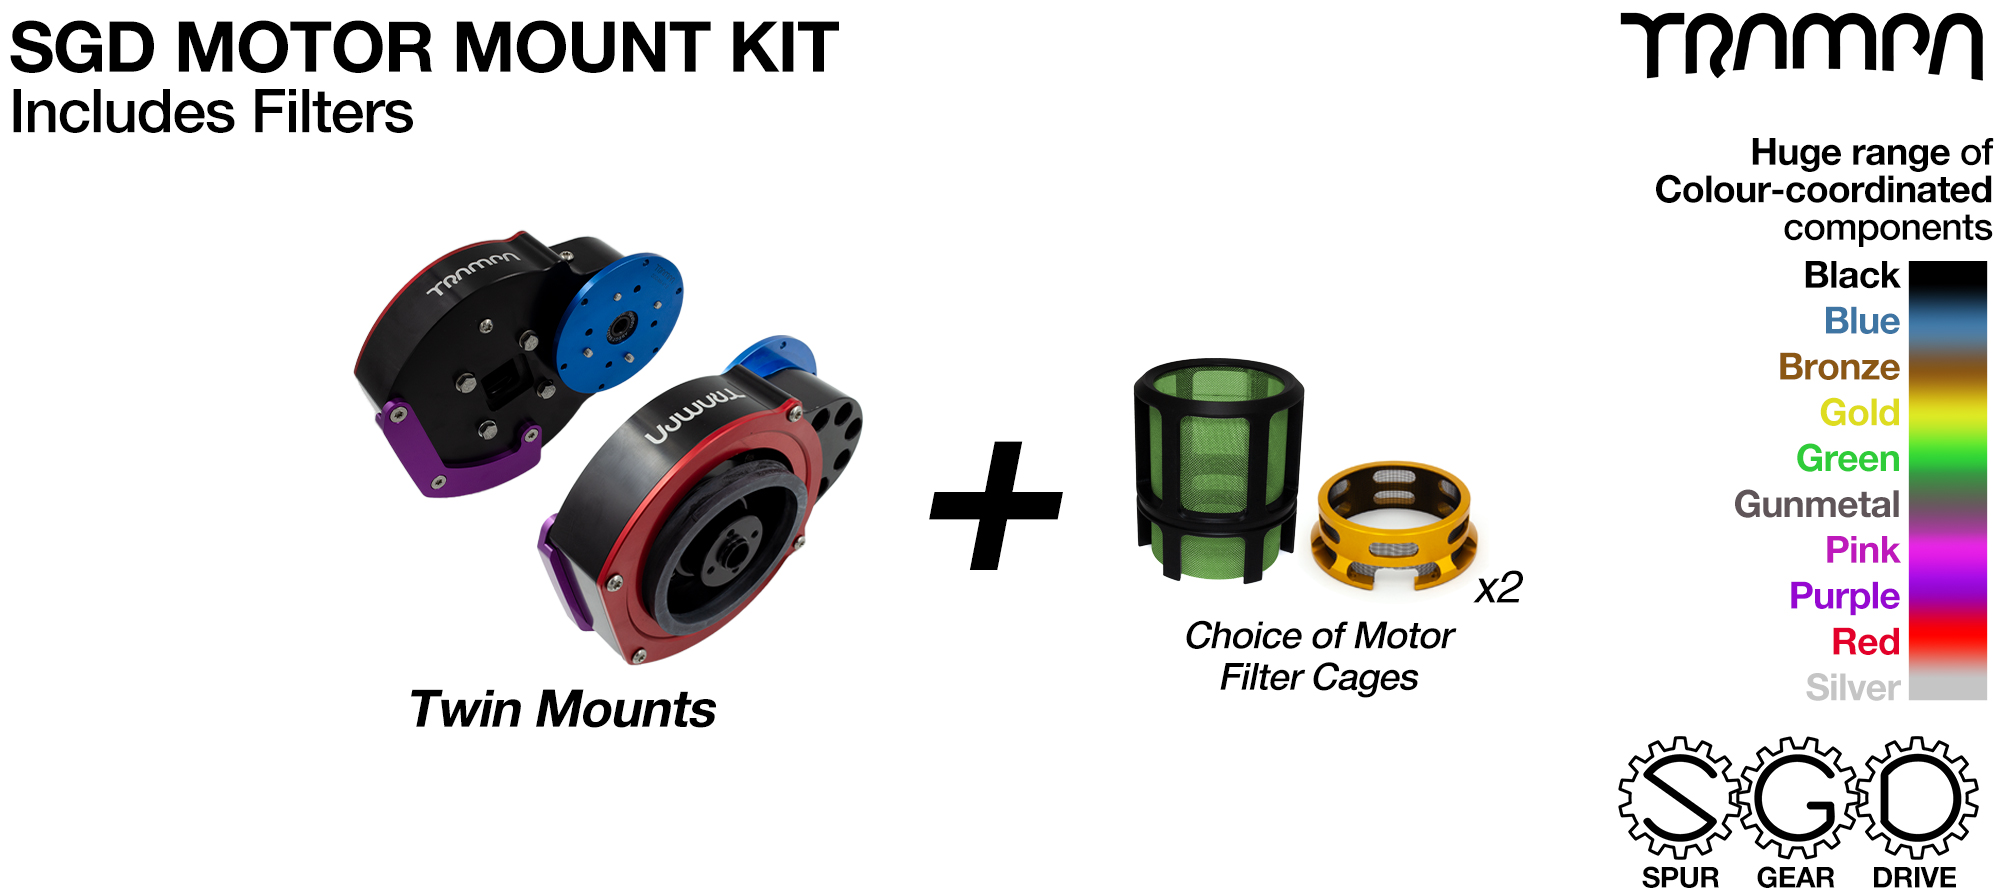 Mountainboard Spur Gear Drive TWIN Motor Mount with FILTERS - NO Pulleys & NO Motors 